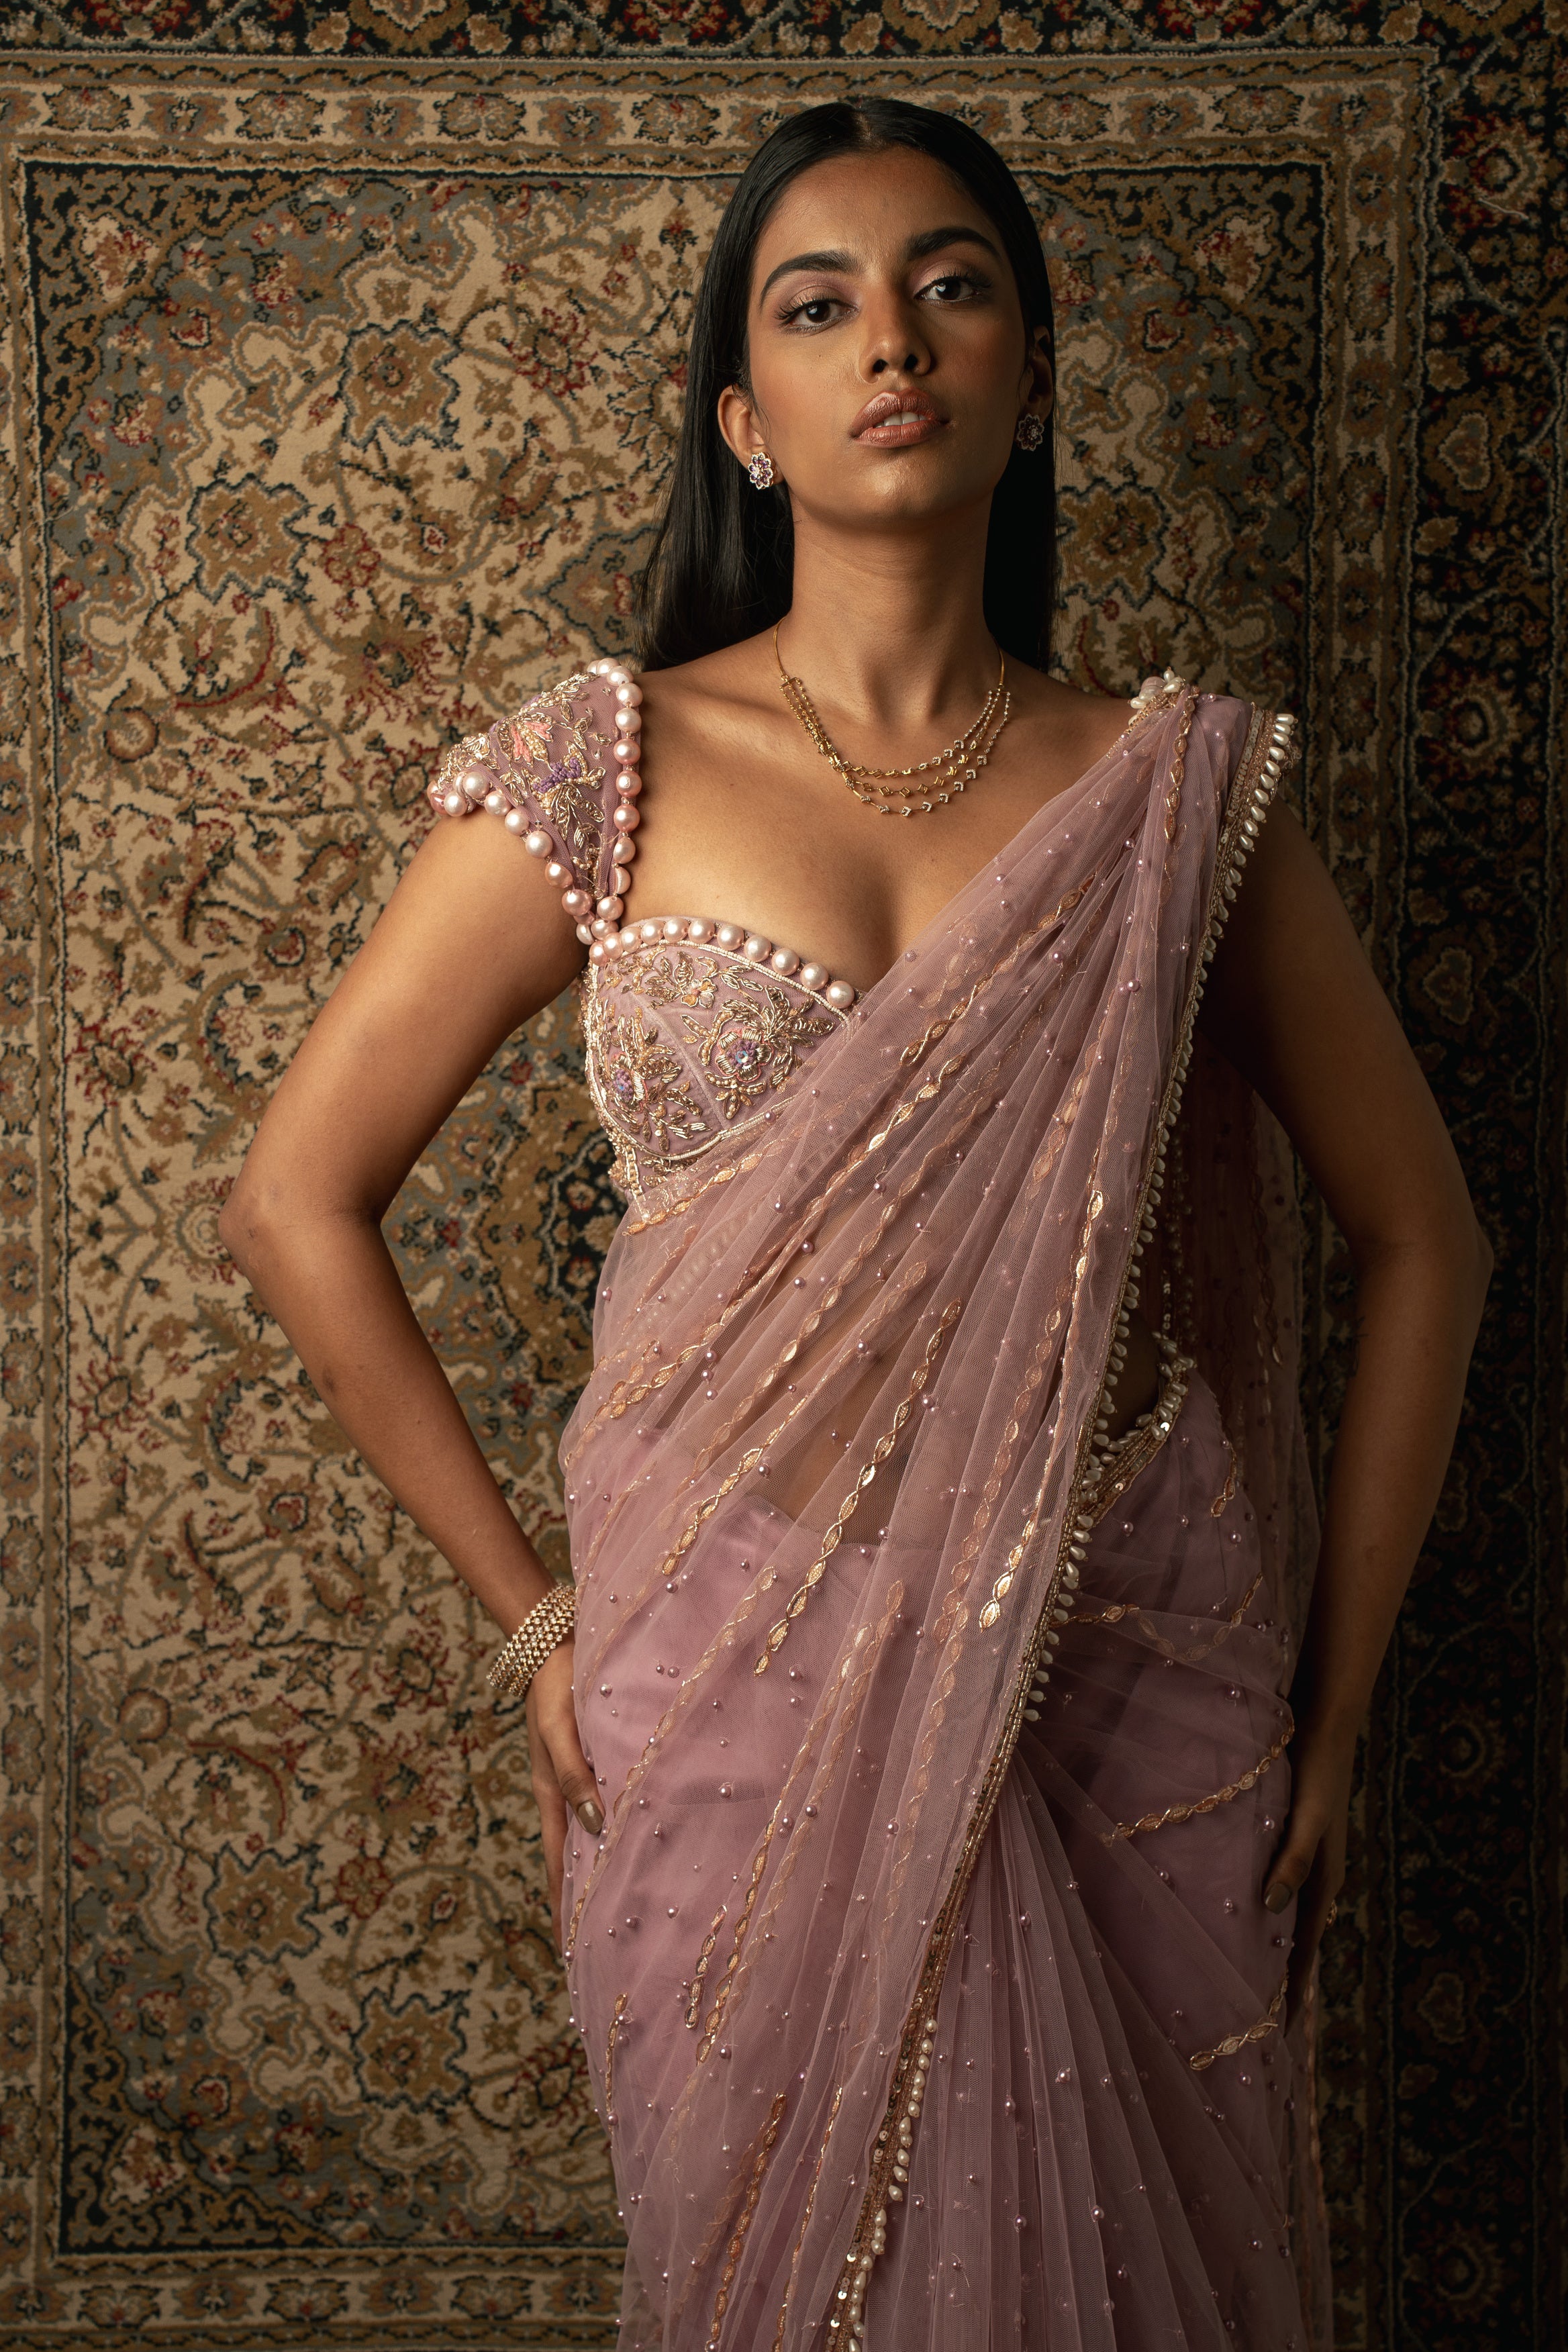 Indulge in luxury: Lilac Net Saree adorned with a Velvet and Net blouse, a mesmerizing ensemble for the modern woman.